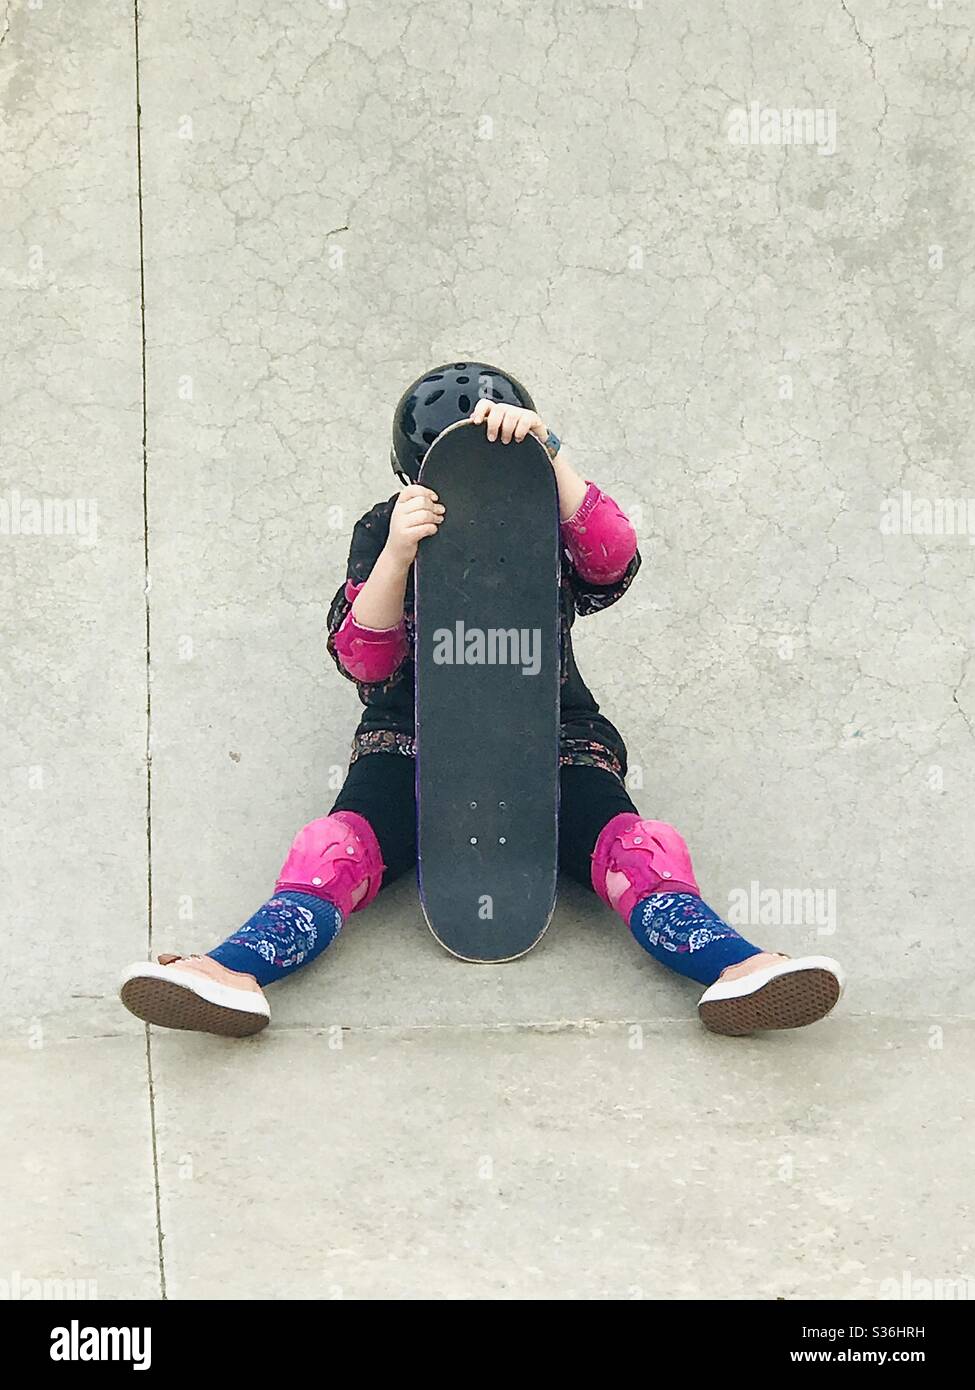 A girl sitting on the ground with a skateboard in from of her face. Stock Photo